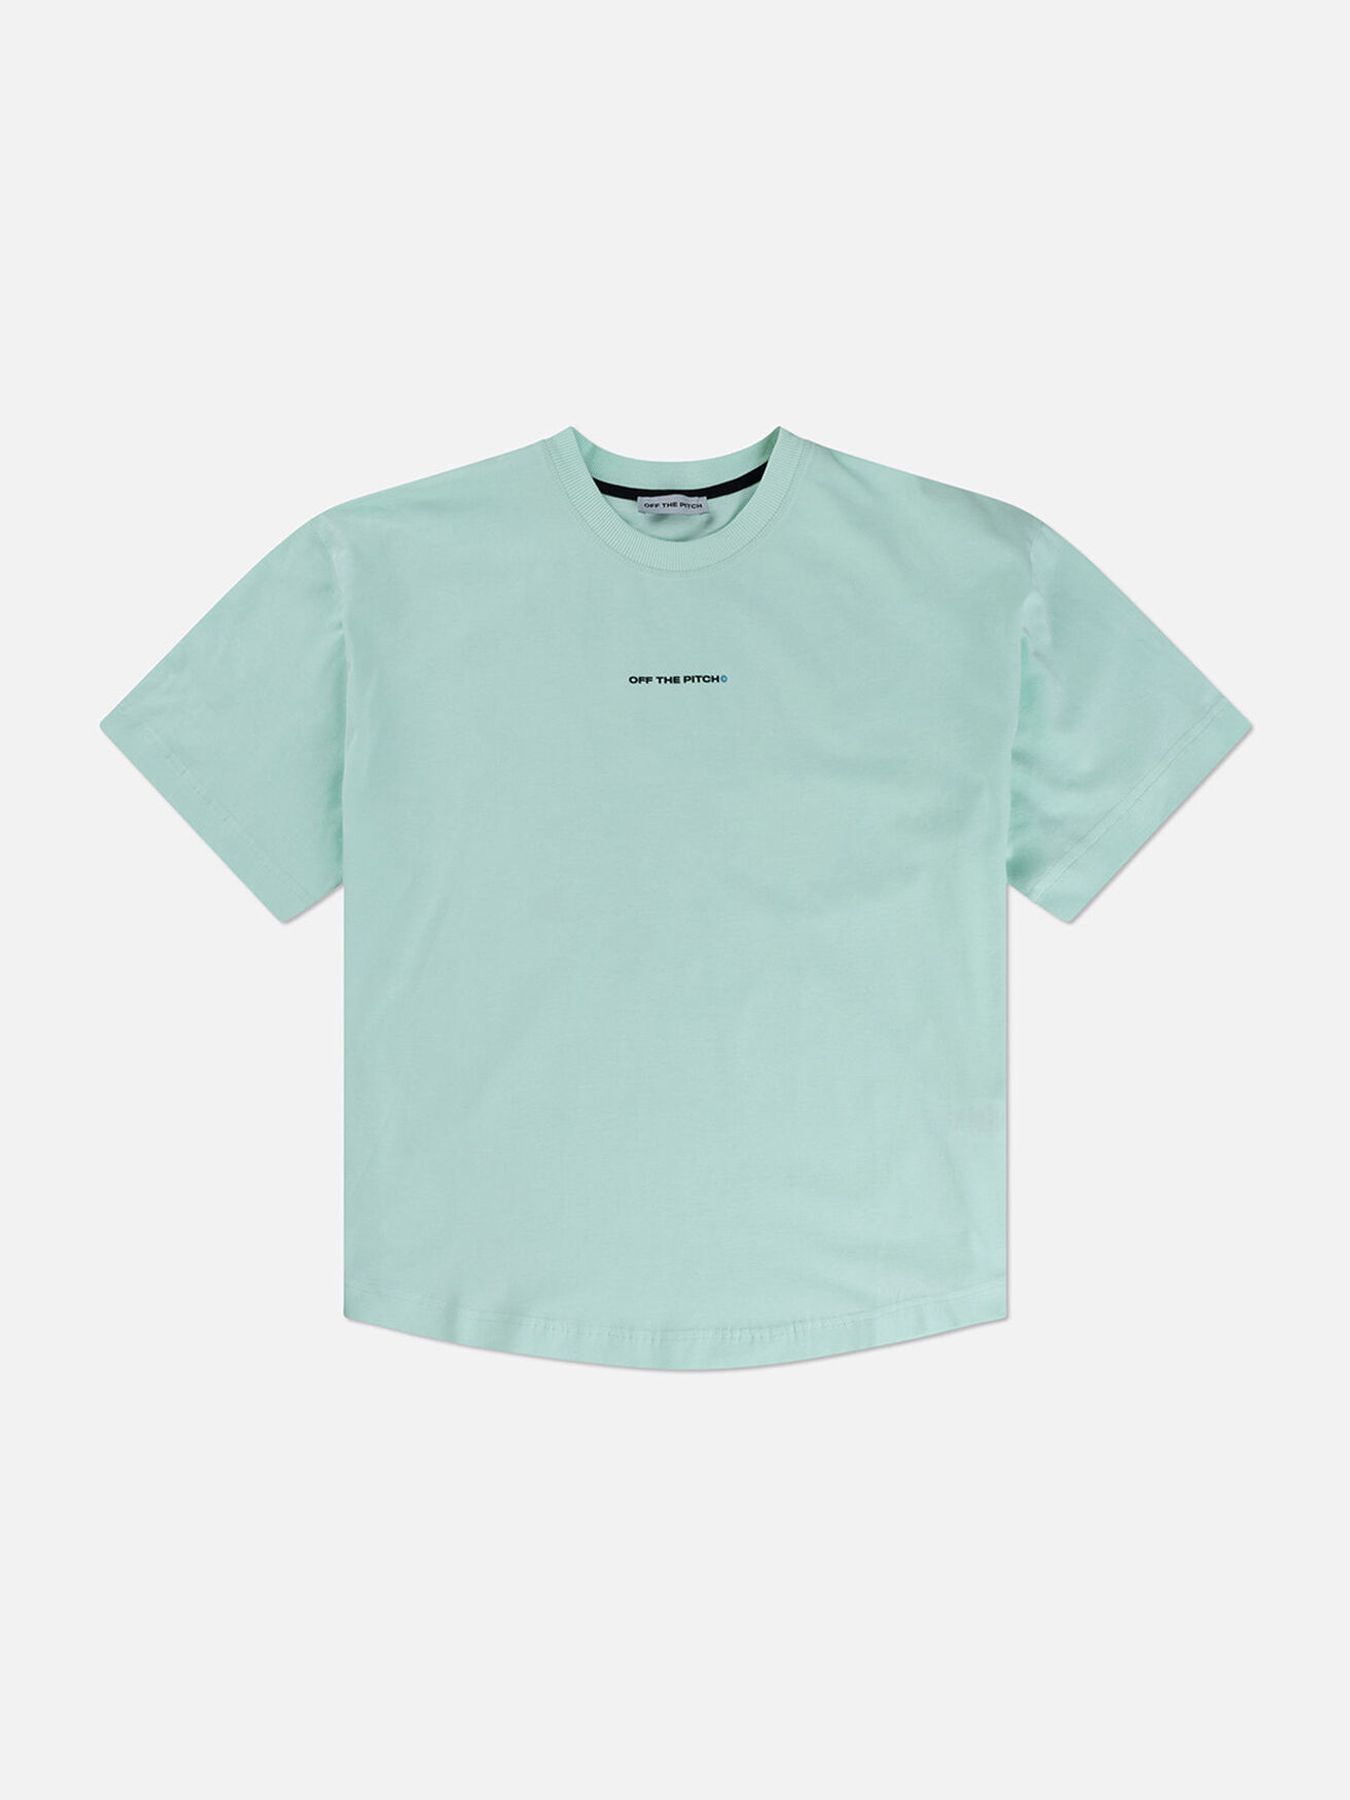 Off The Pitch New world tee Jade Mint 00108232-603